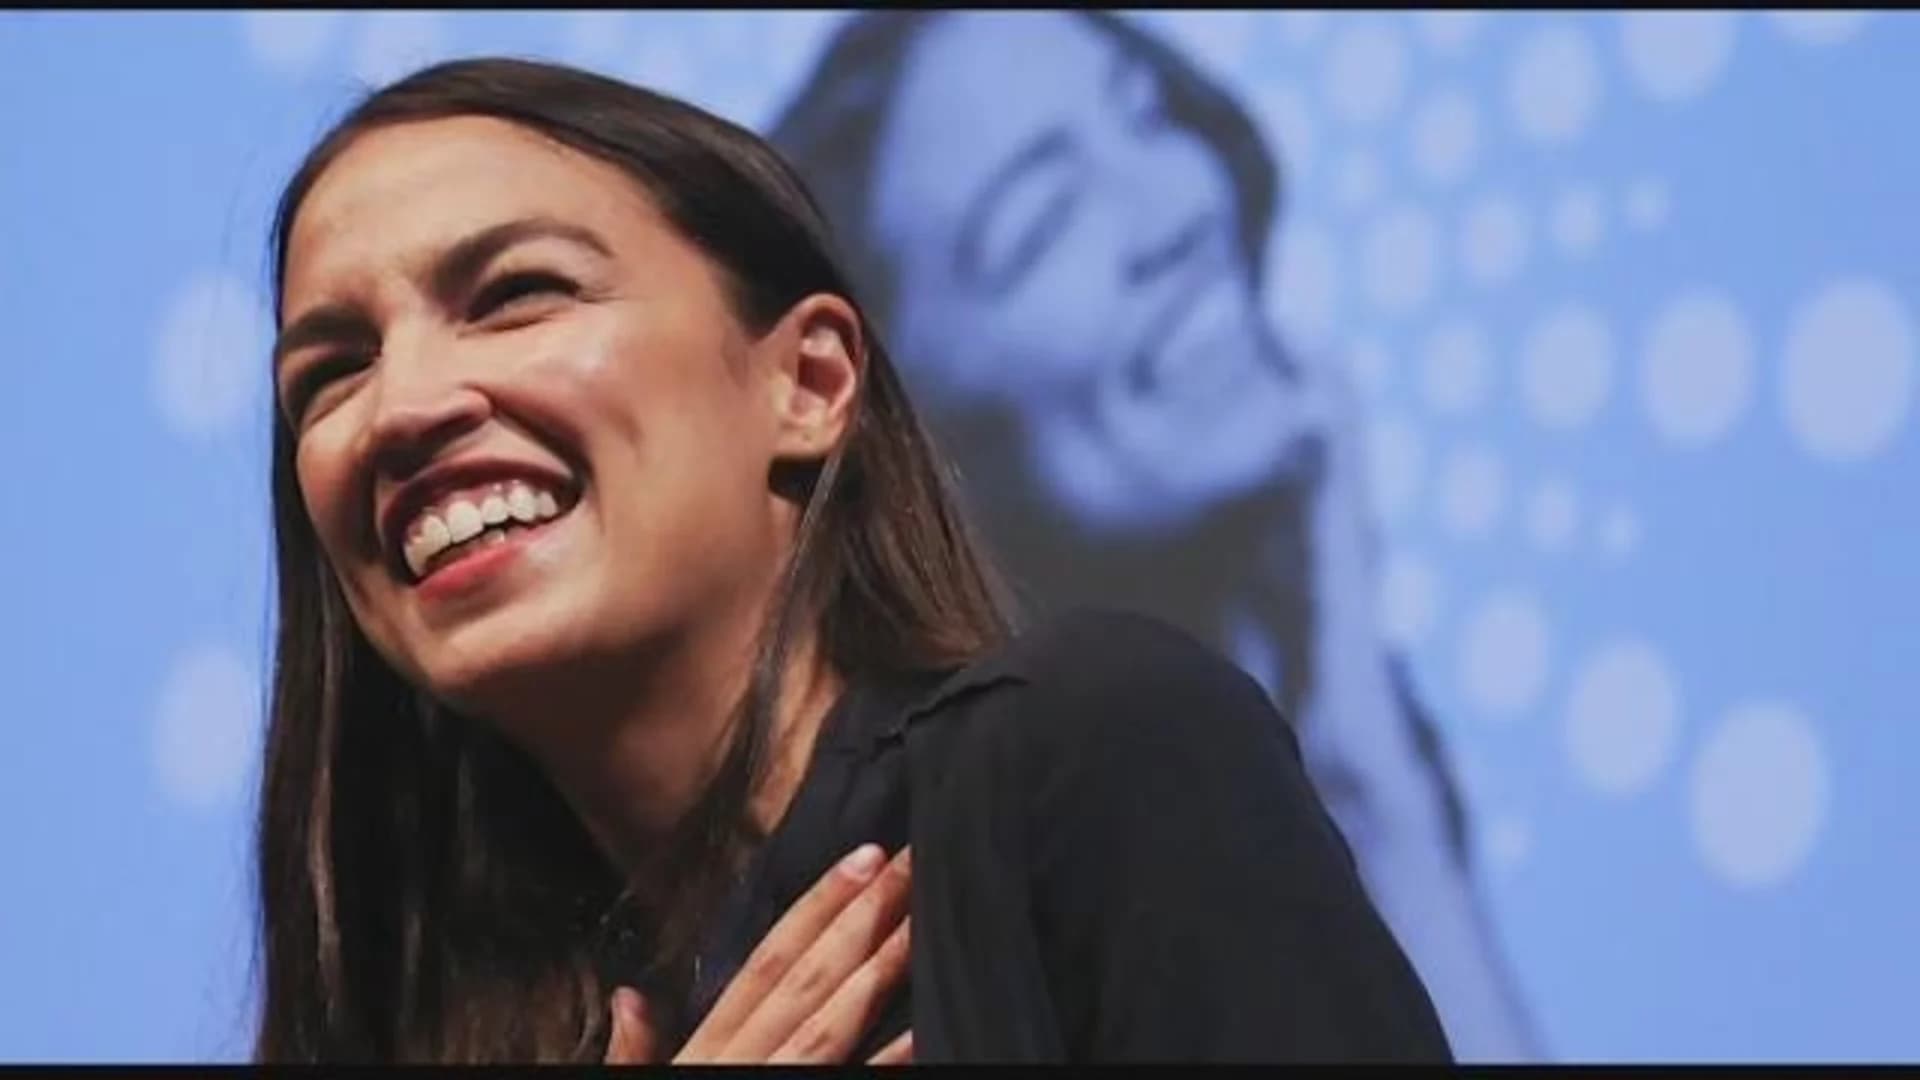 Rep. Ocasio-Cortez says she's working to find permanent Bronx office